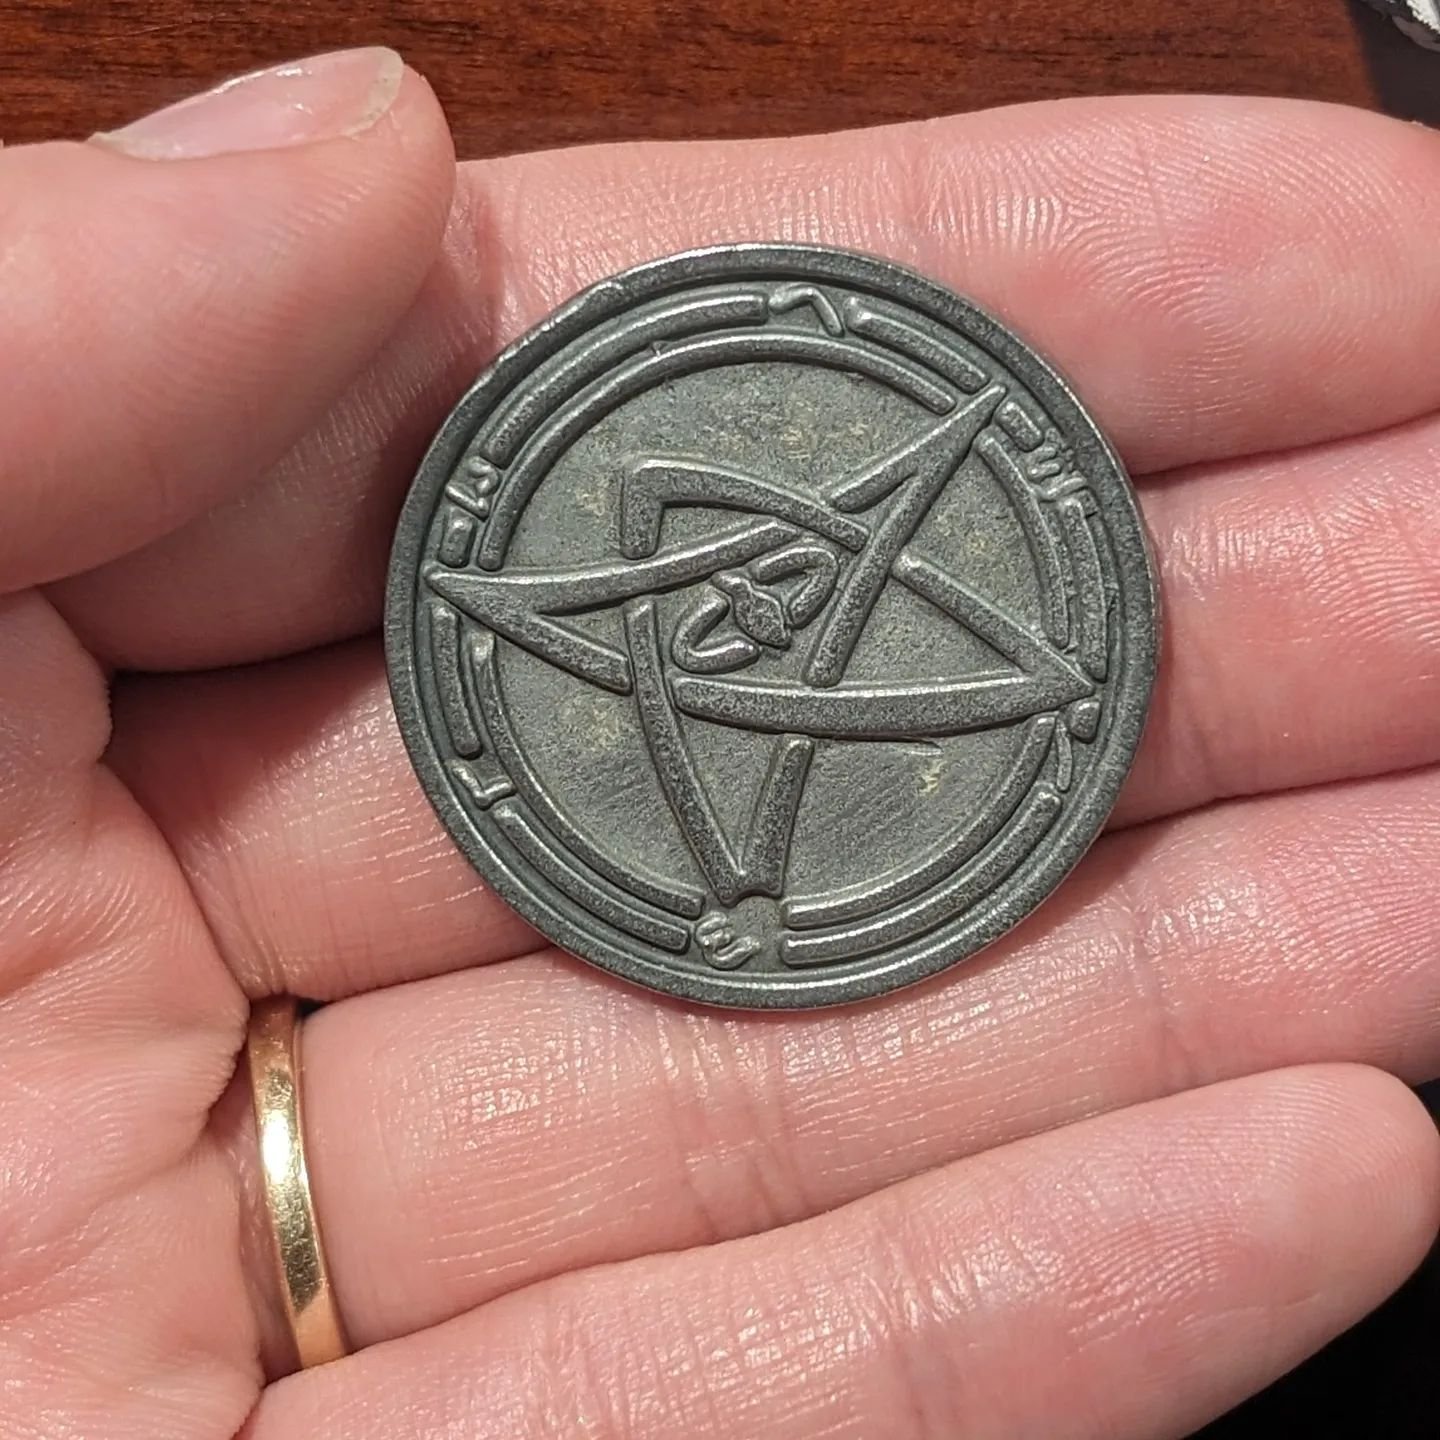 The props just keep coming!
This coin is definitely haunted or something, but it sure is cool.

#RoleplayRejects #ActualPlayPodcast #TTRPG #RPGPodcast #TableTopGames #TabletopRPG #RPG #tabletoproleplaying #roleplayinggames #roleplayinggame #notdnd #t